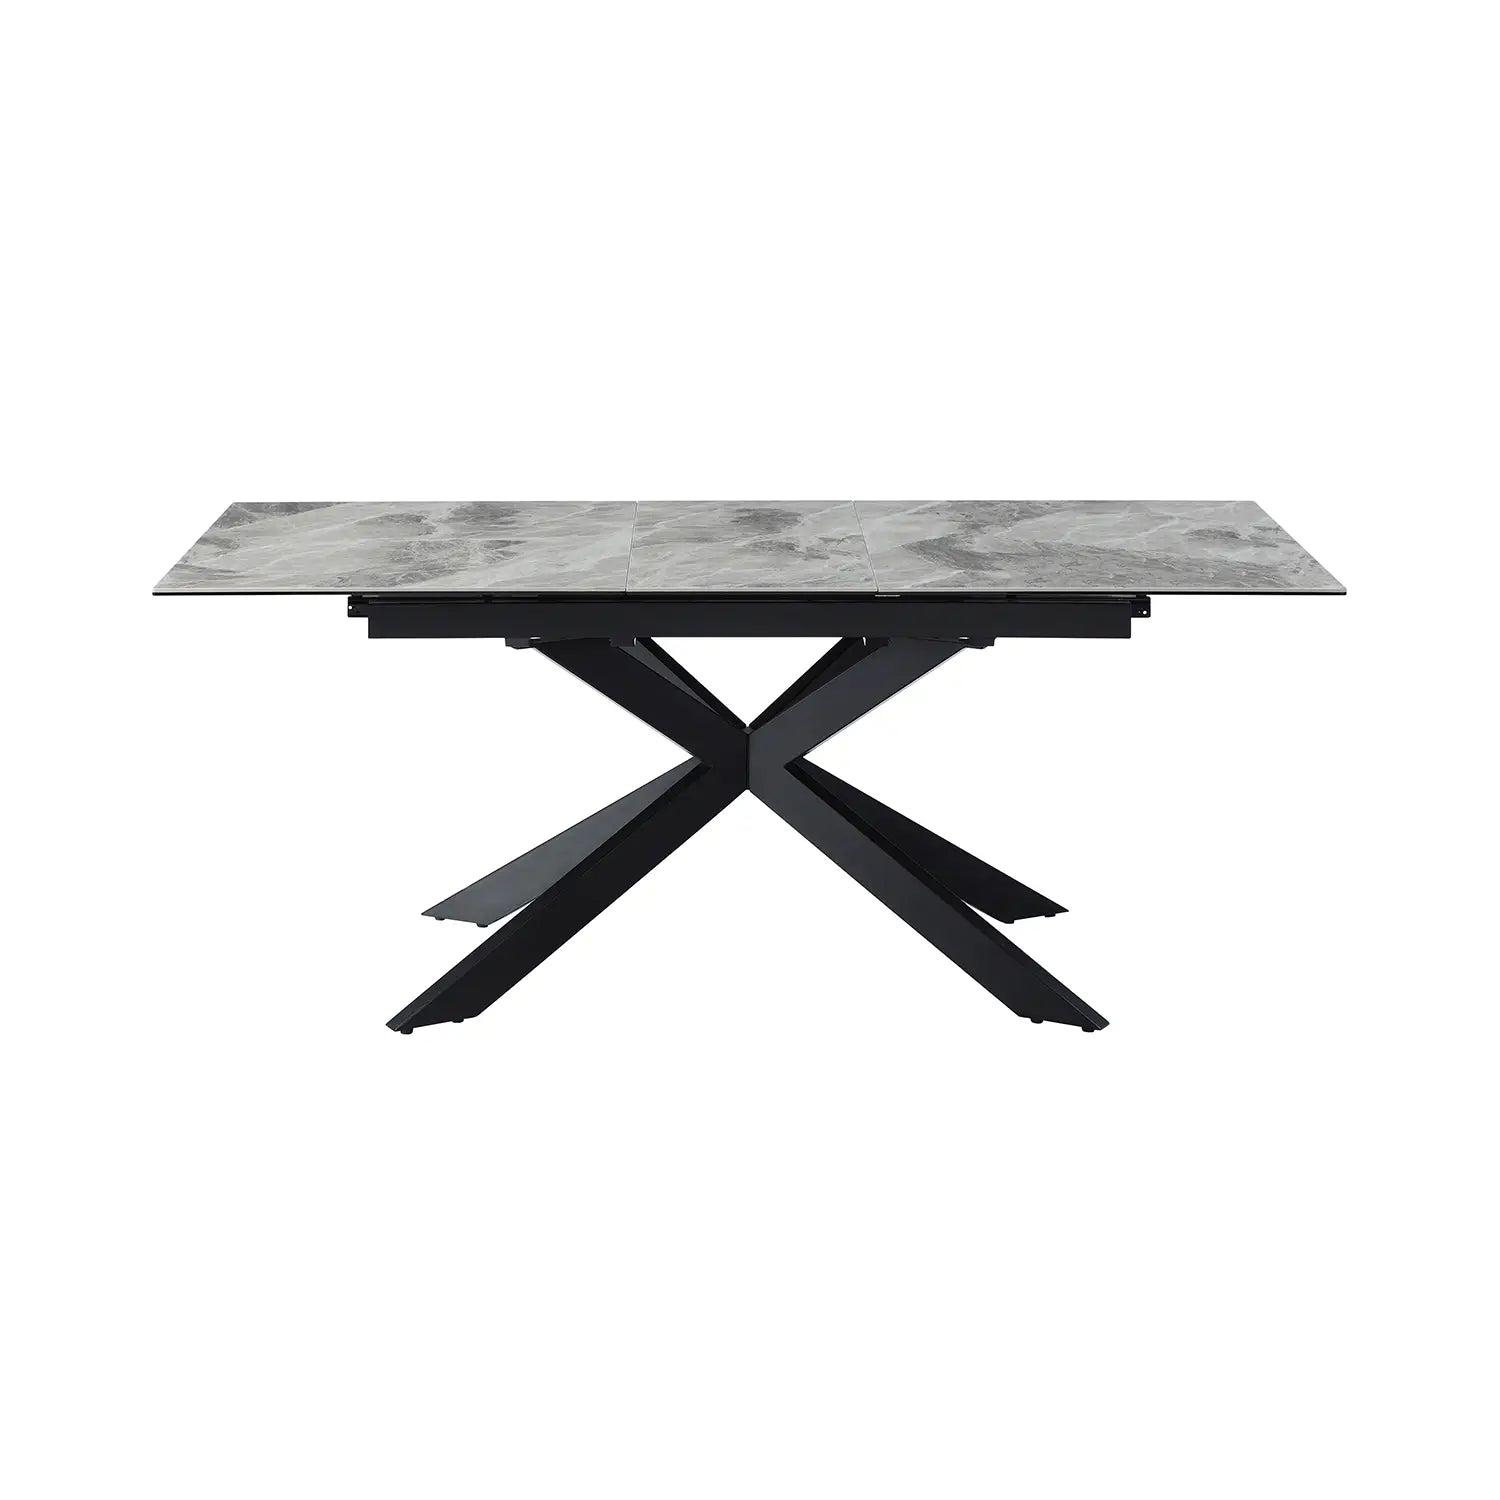 Creed Light Grey Extendable Ceramic Dining Table